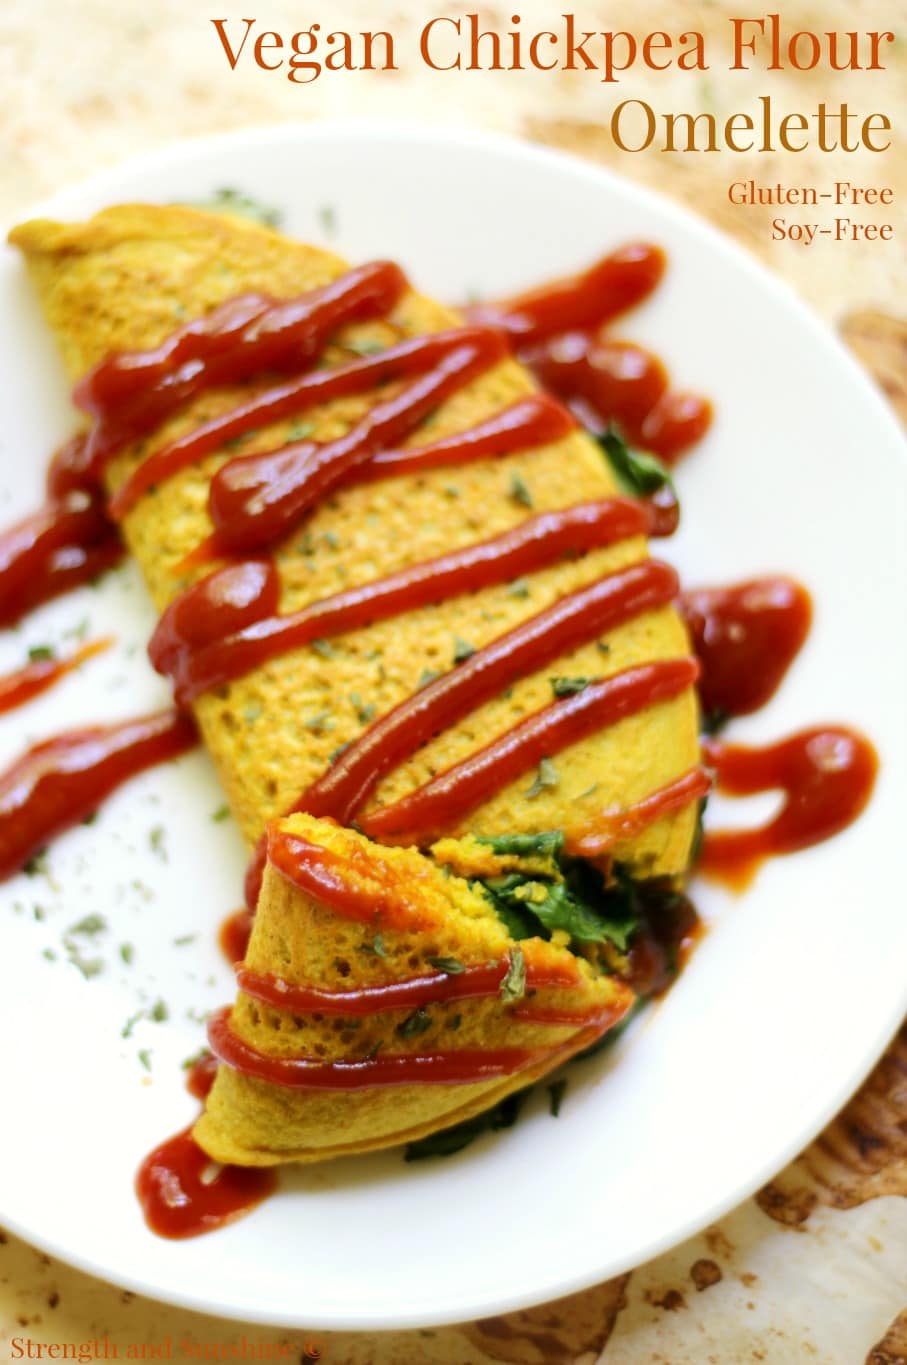 25 Vegan Breakfast Recipes - healthy mostly gluten-free recipes to start your morning with. | thehealthfulideas.com